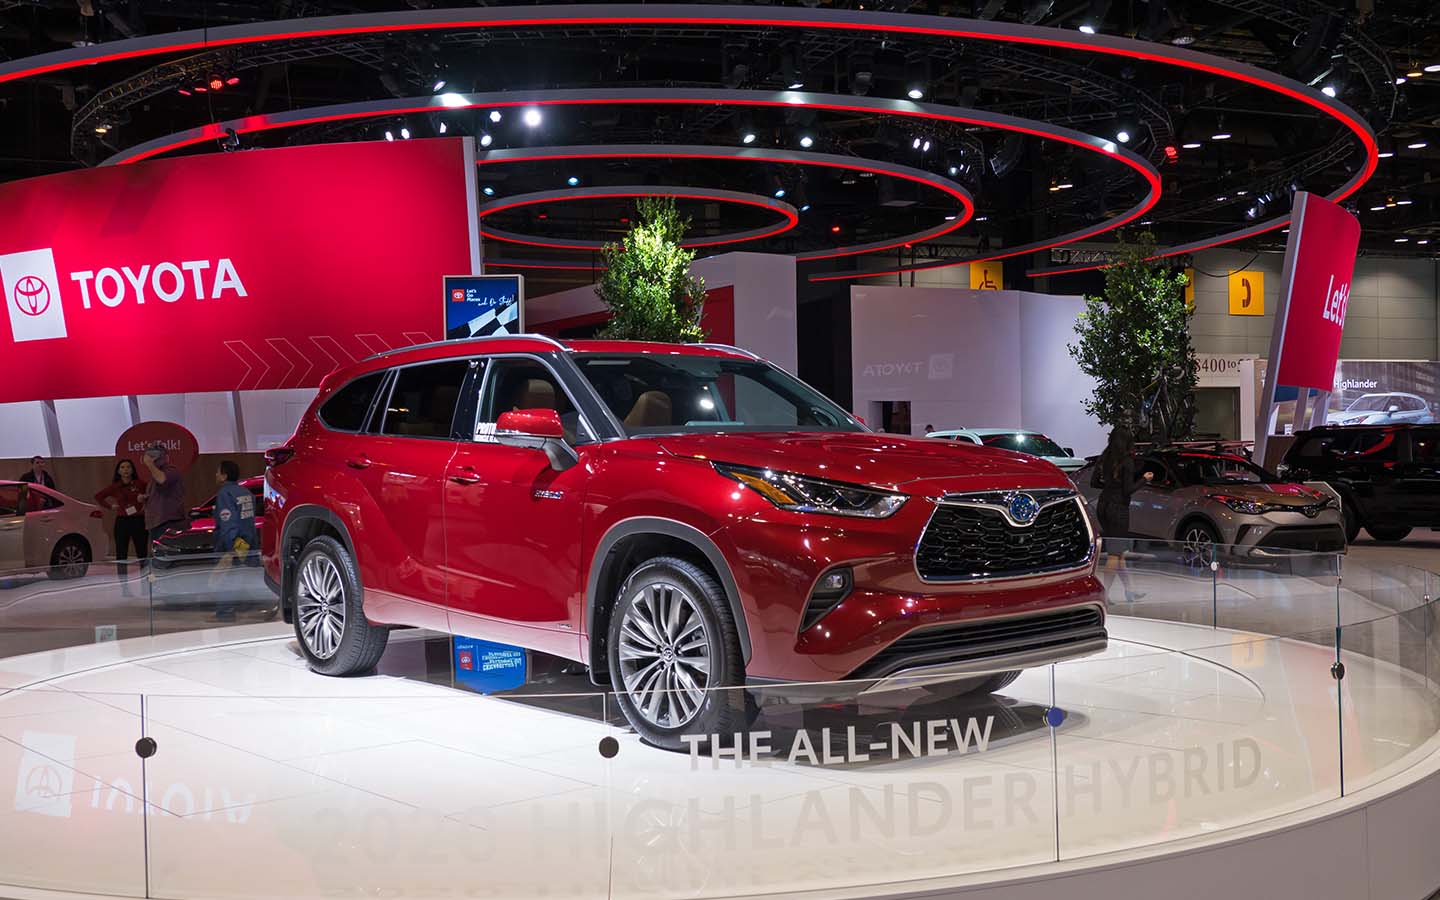 the highlander is available with different engine specs